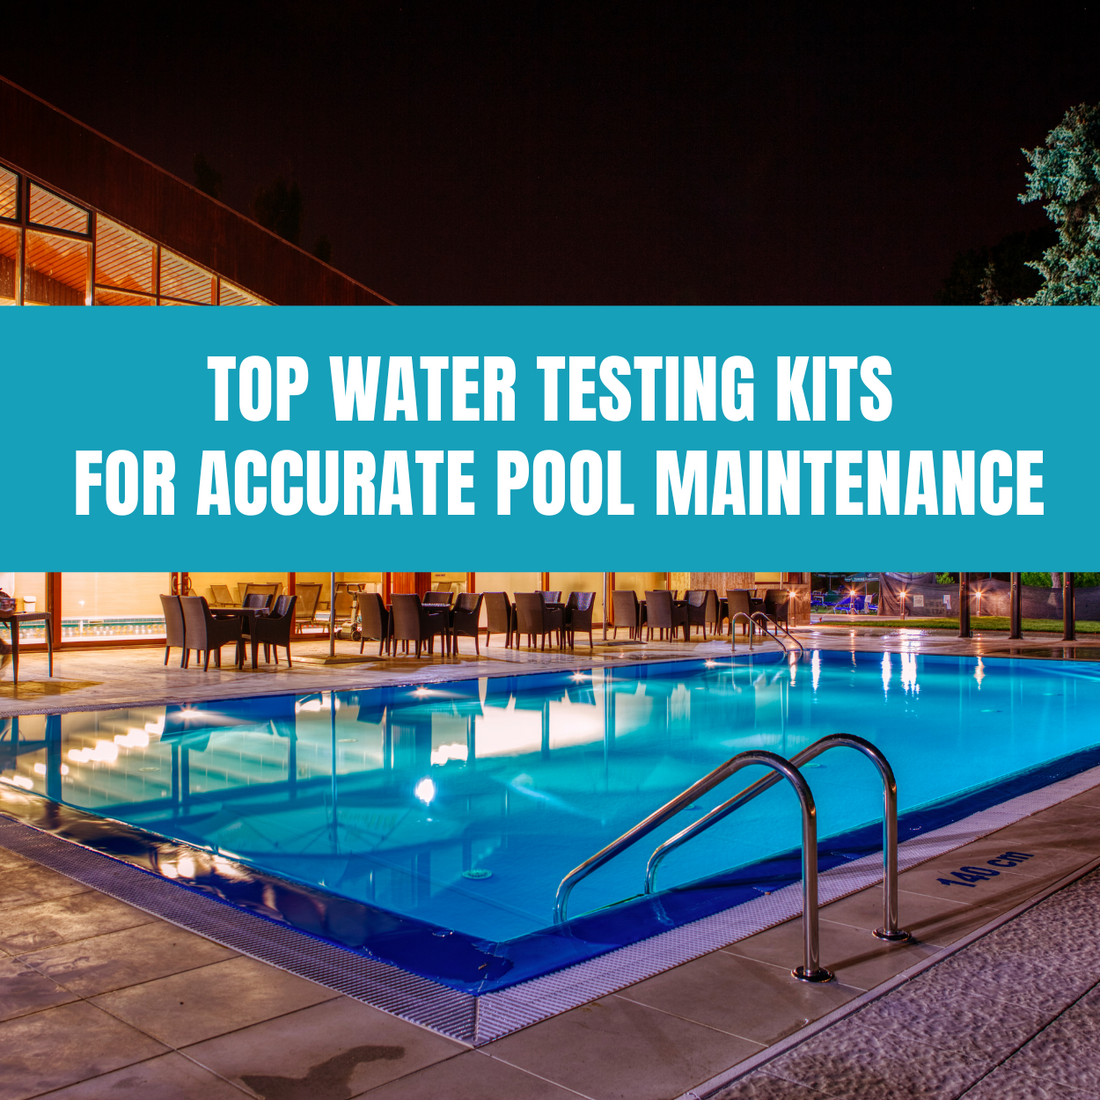 Top water testing kits for accurate pool maintenance to ensure safe and balanced water